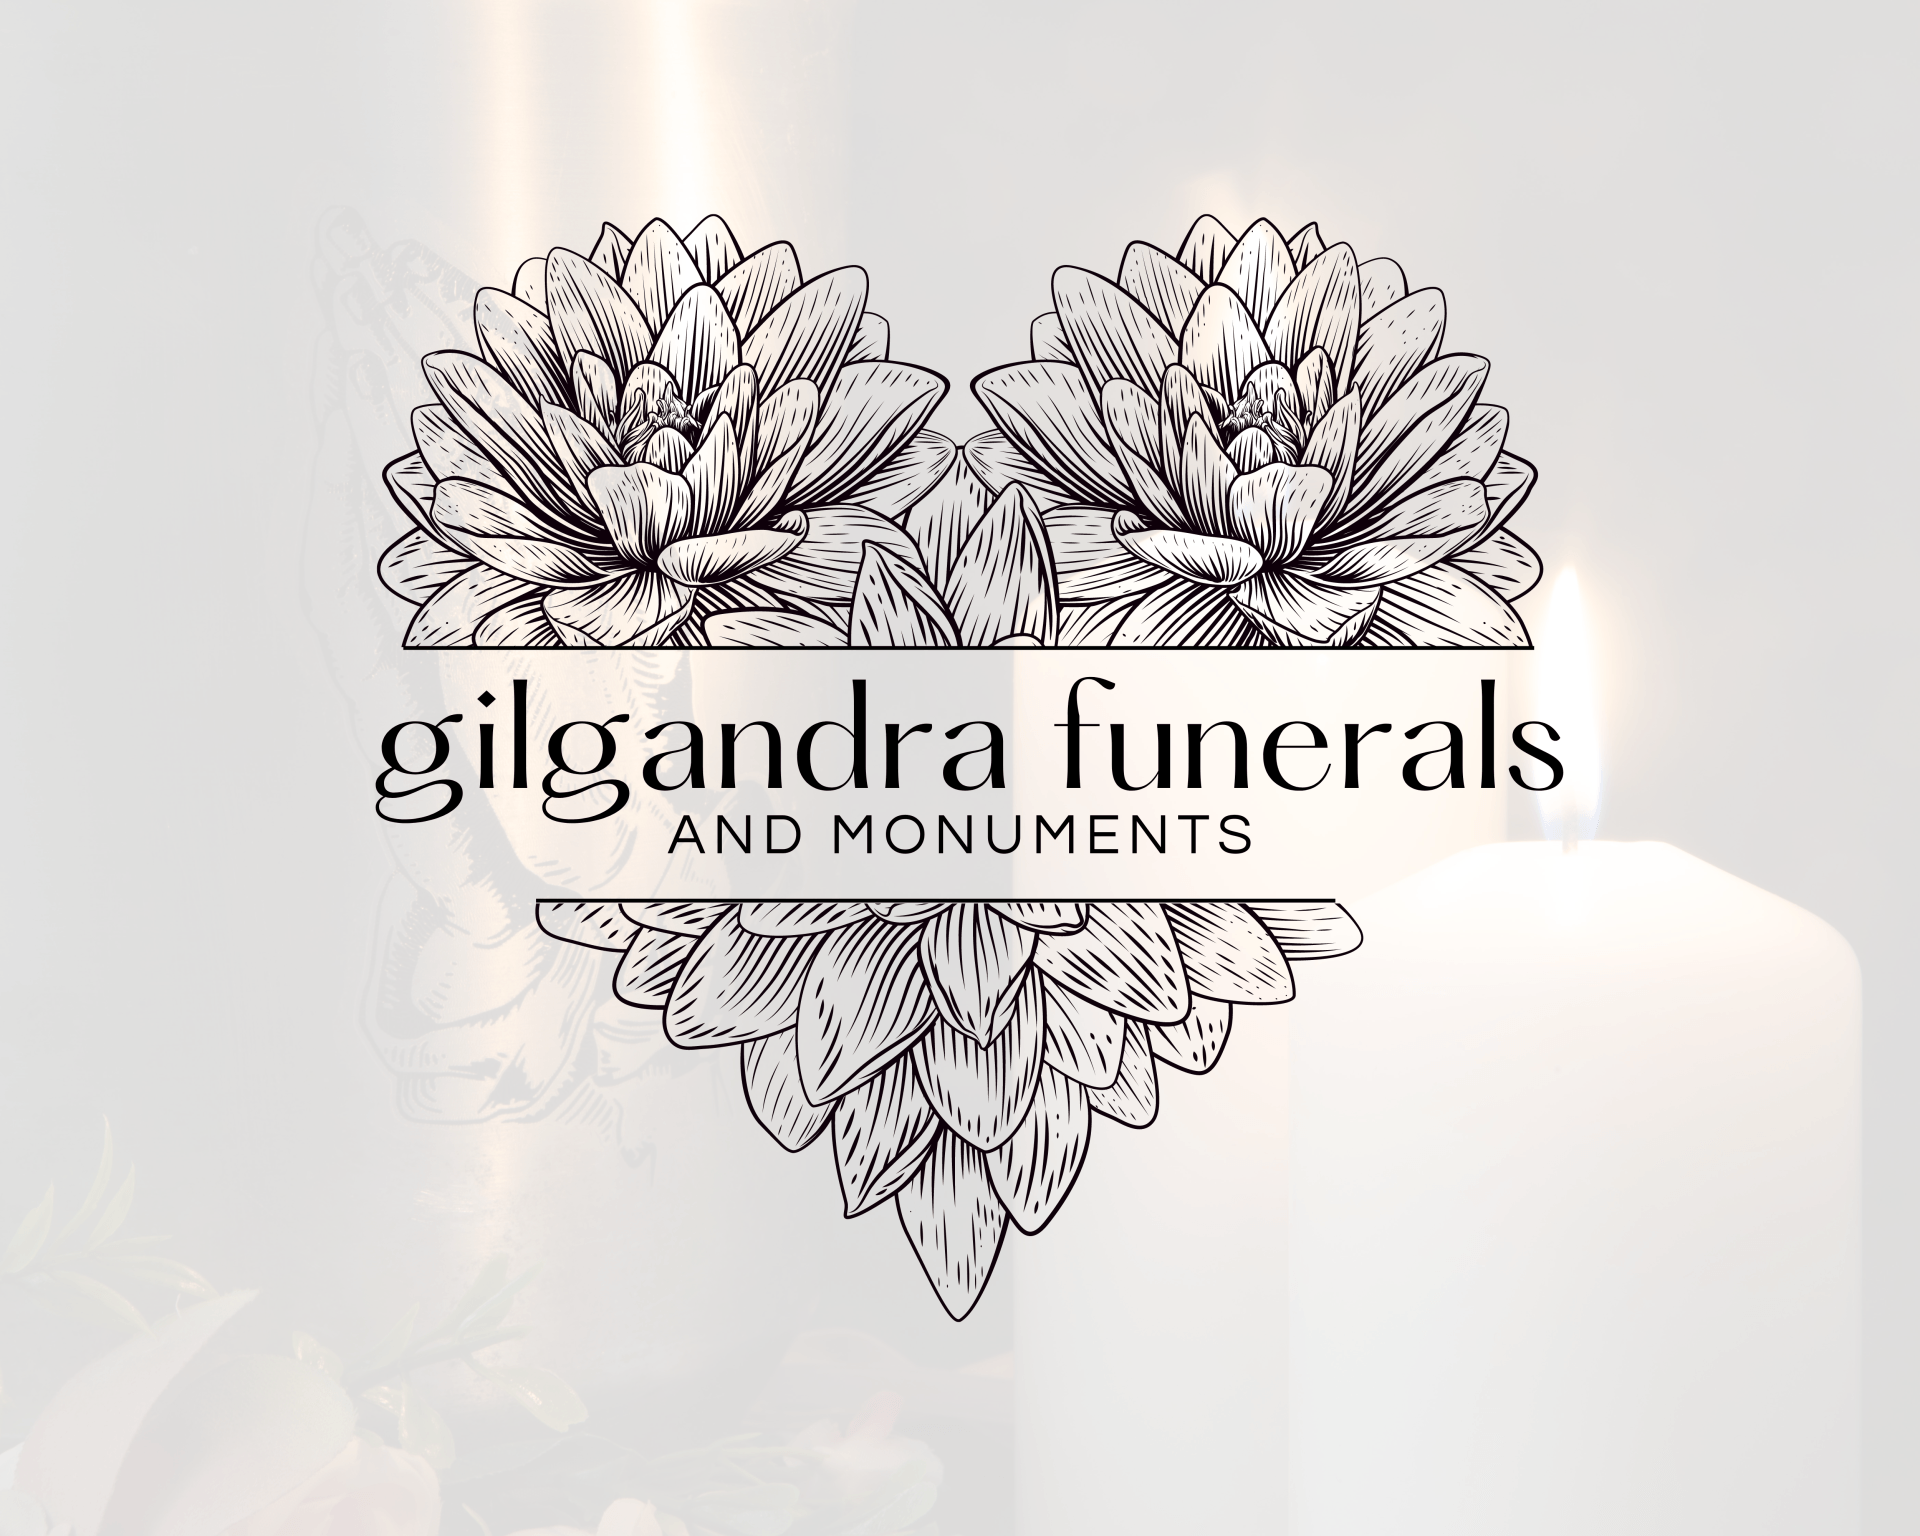 Brown Coffin — Funeral Director in Gilgandra, NSW